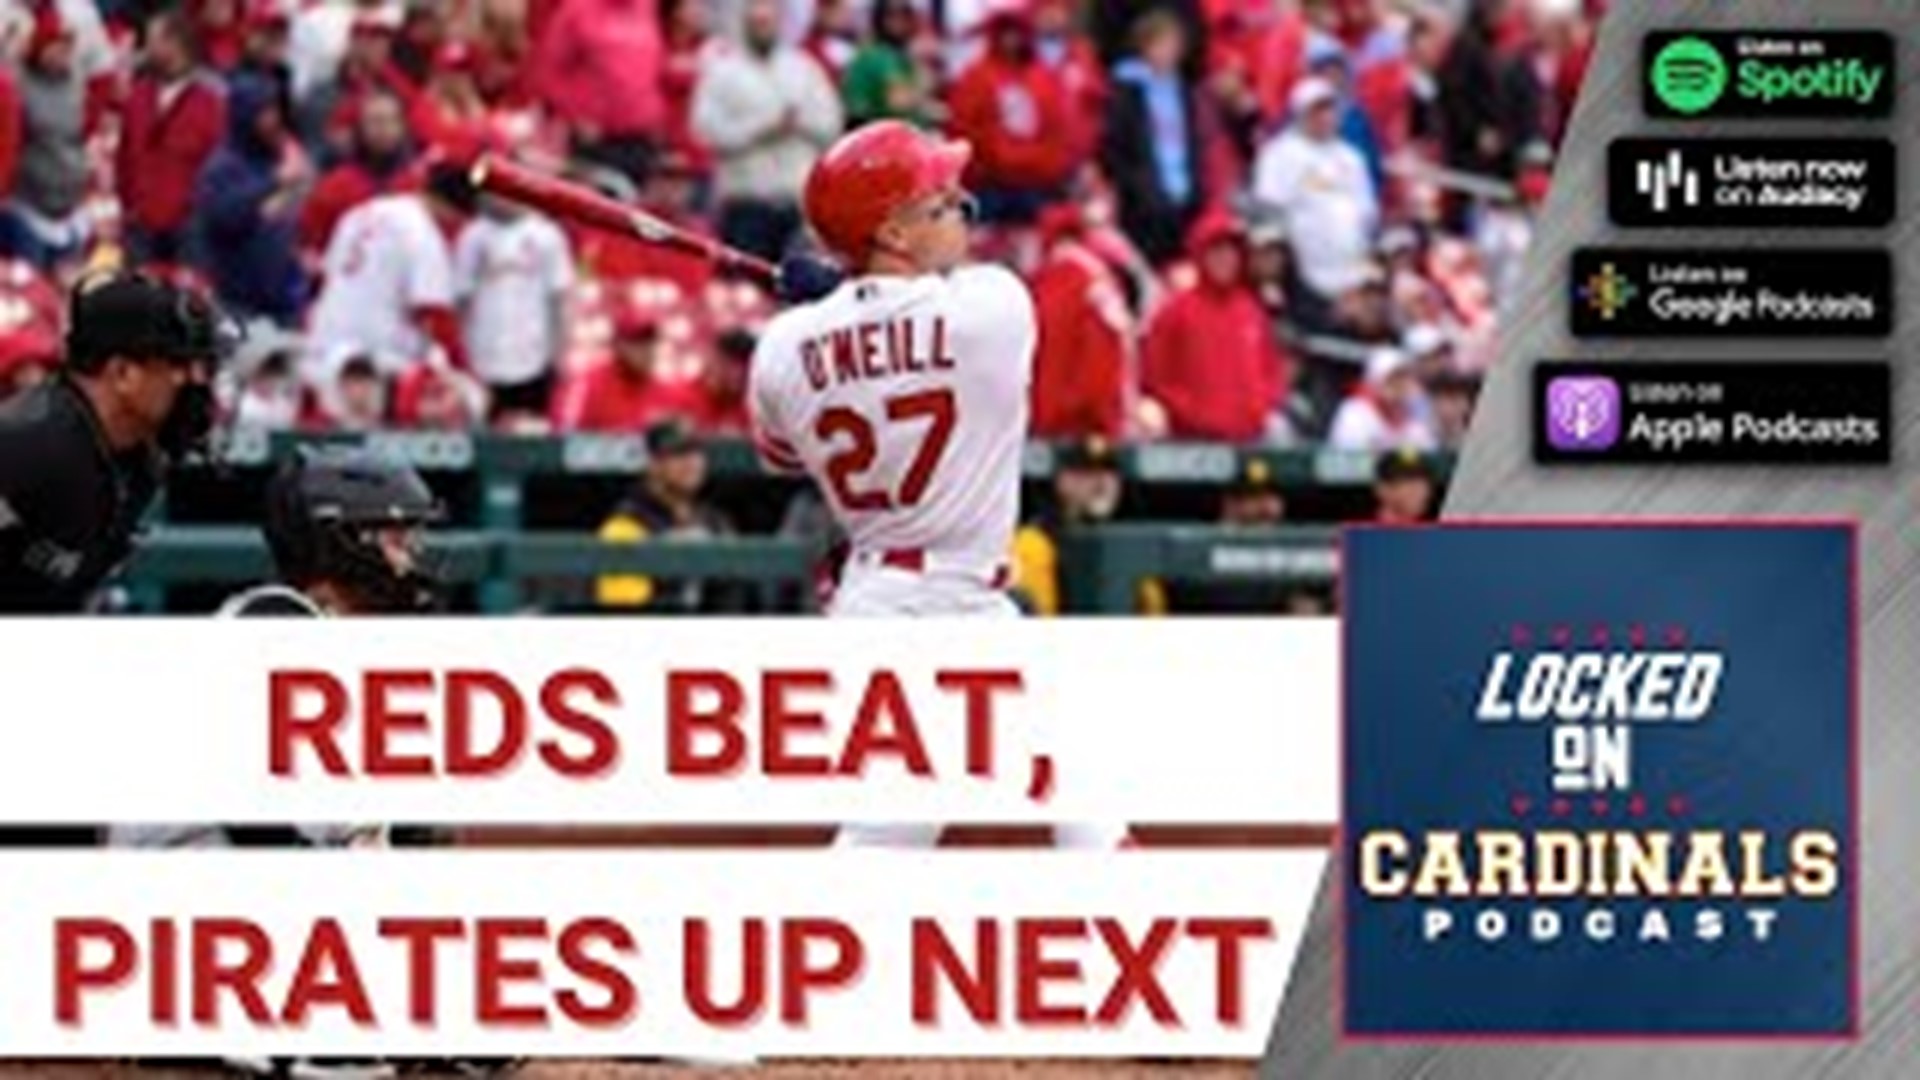 While it was not in incredibly convincing fashion, the St. Louis Cardinals beat the Cincinnati Reds twice over the weekend.